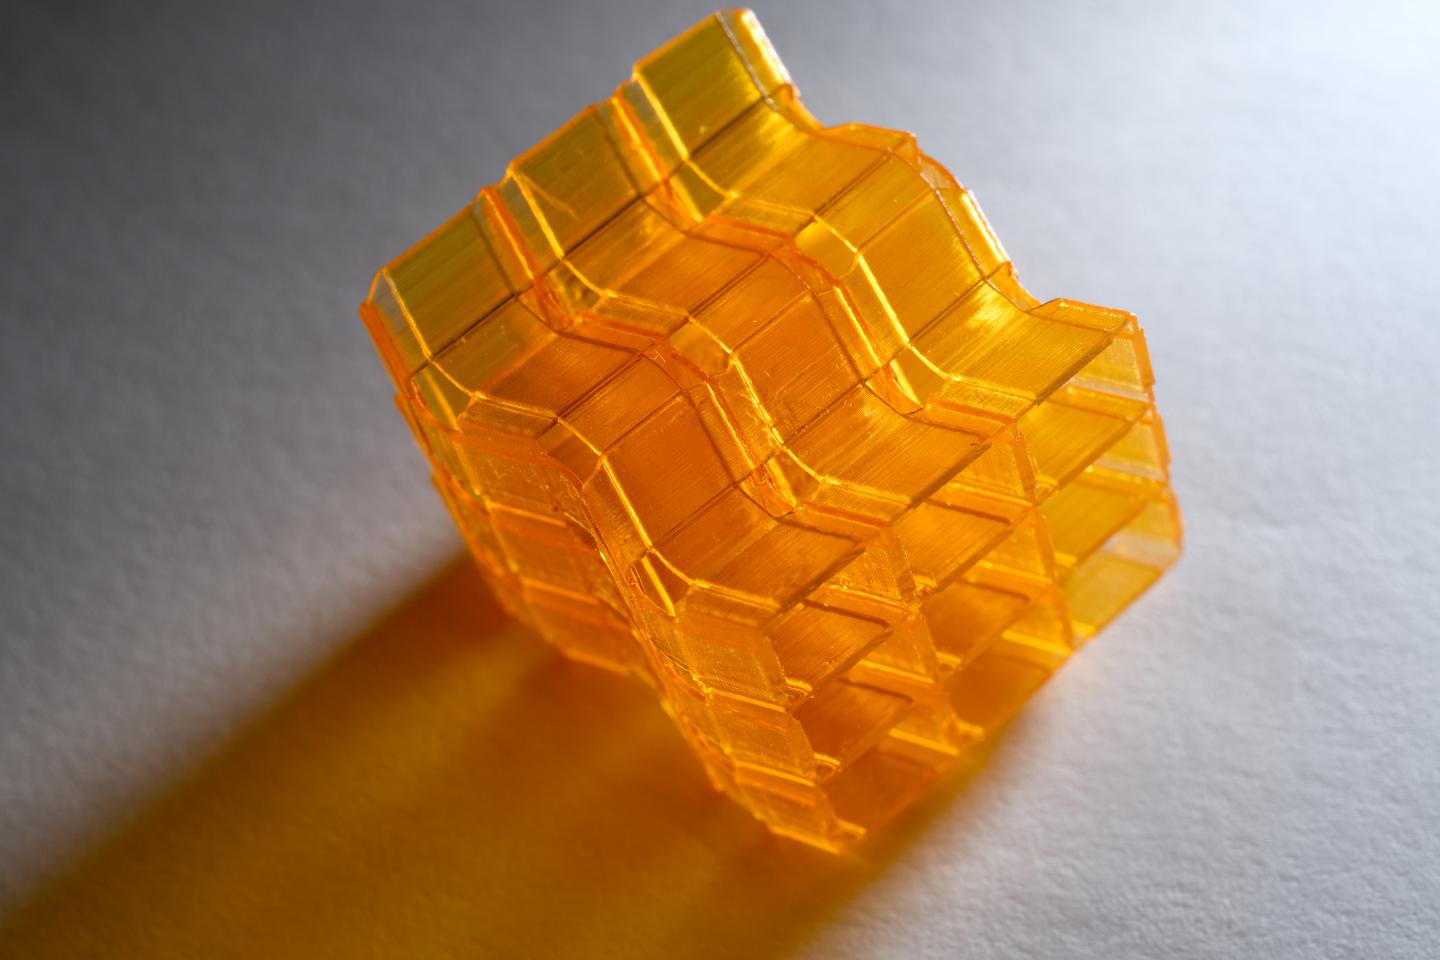 DLP 3D Printing Technique Fabricates Strong, Reconfigurable Origami Structures